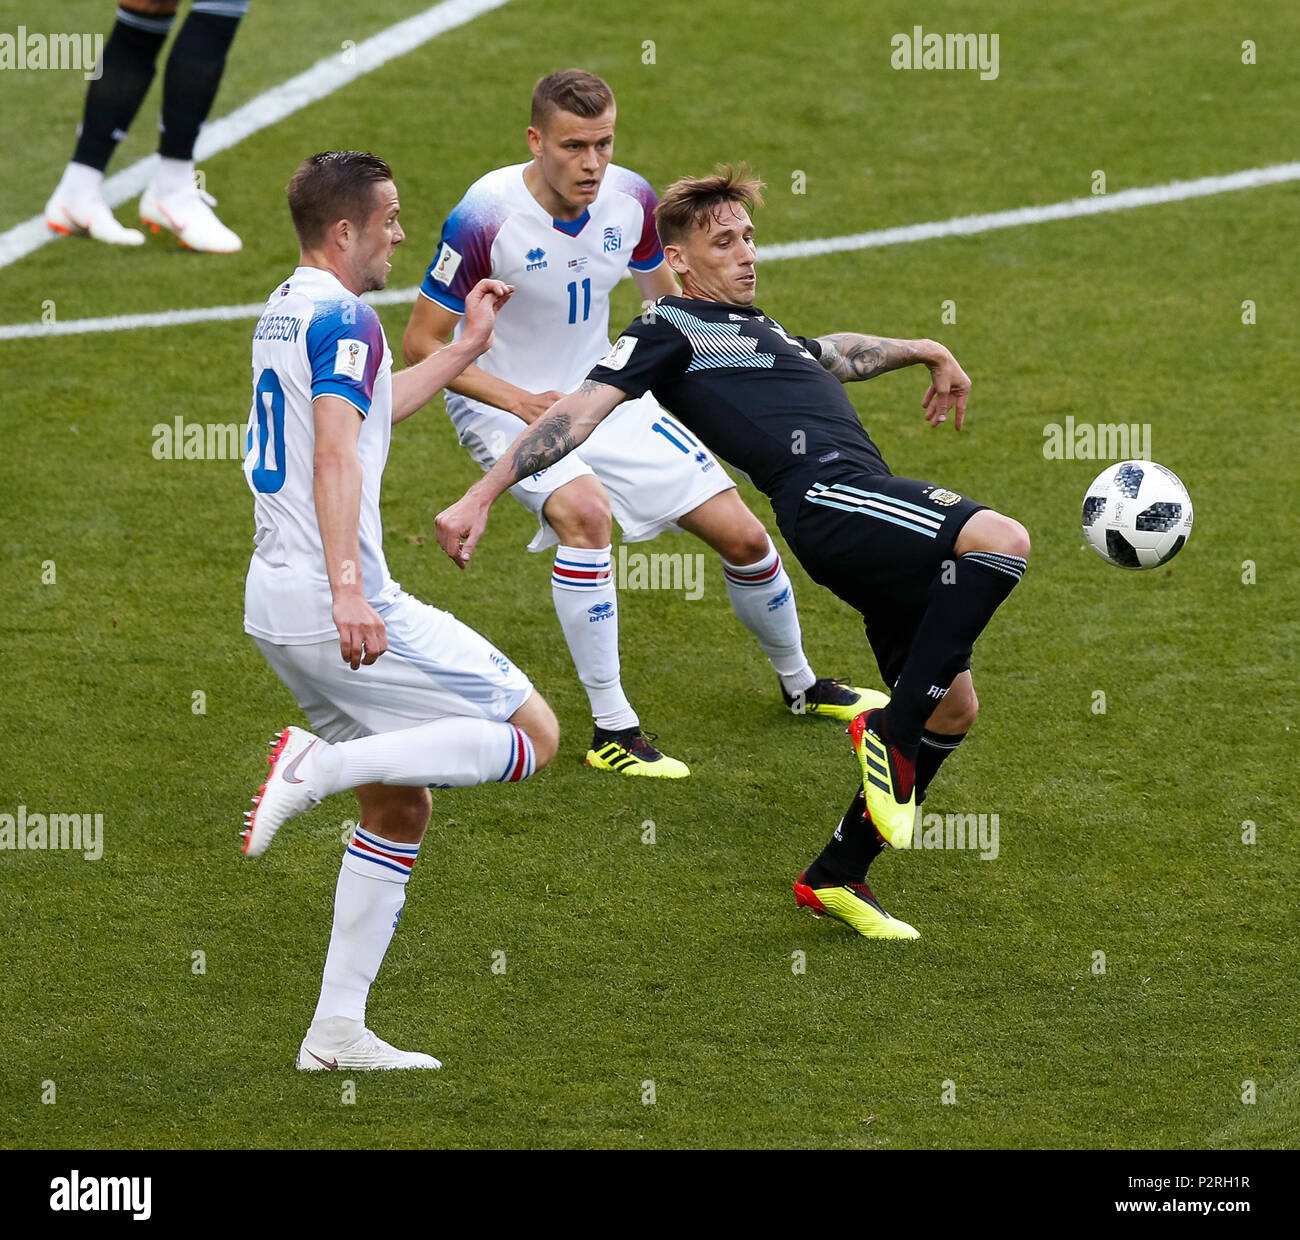 Moscow, Russia. 16th Jun, 2018. Lucas Biglia of Argentina during the 2018 FIFA World Cup Group D match between Argentina and Iceland at Spartak Stadium on June 16th 2018 in Moscow, Russia. (Photo by Daniel Chesterton/phcimages.com) Credit: PHC Images/Alamy Live News Stock Photo